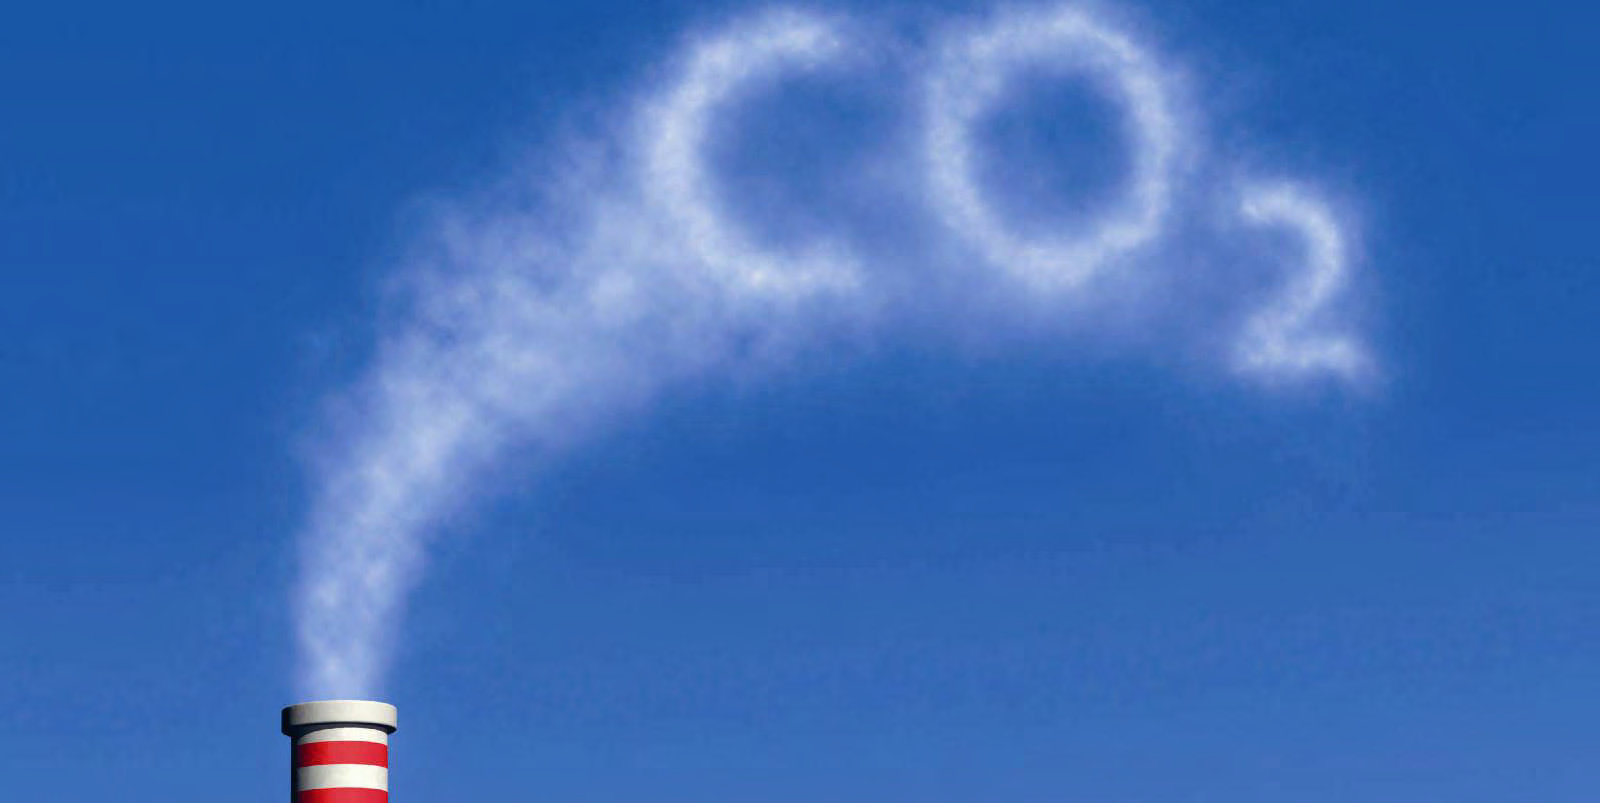 15/08/2012 37 There are many paths towards low CO 2 emissions, but built environment is the key